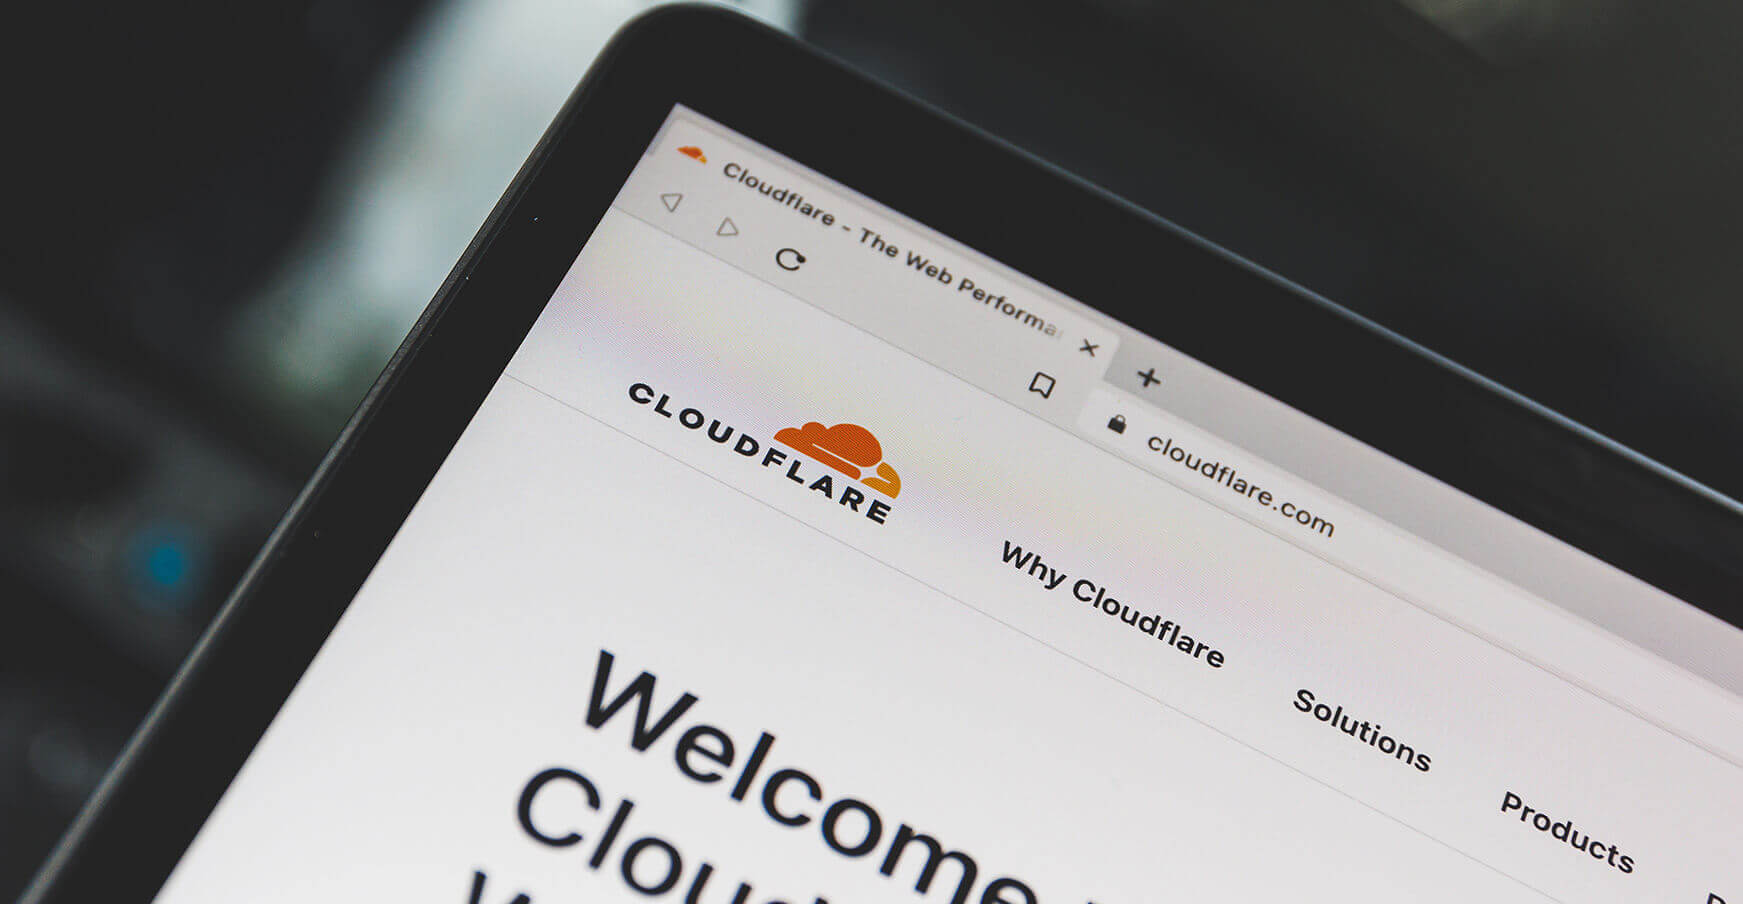 Create a CloudFlare account and give access to your partner